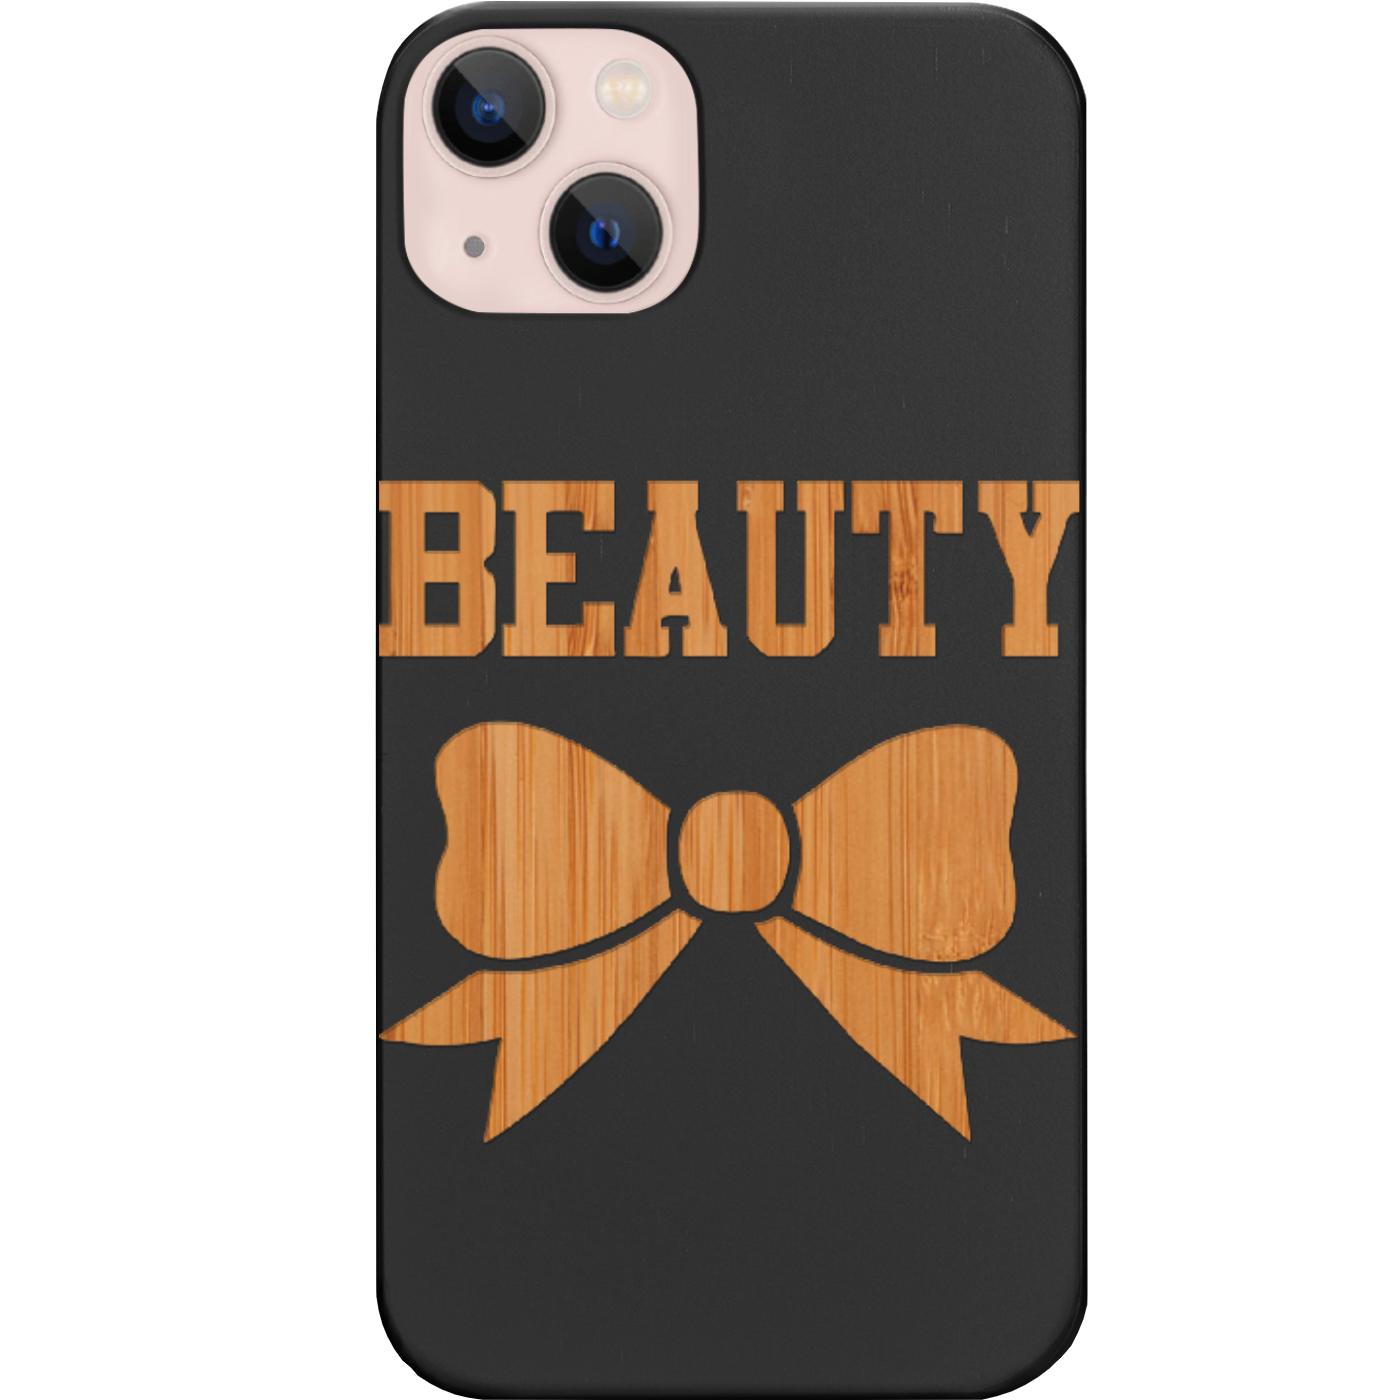 Beauty - Engraved Phone Case